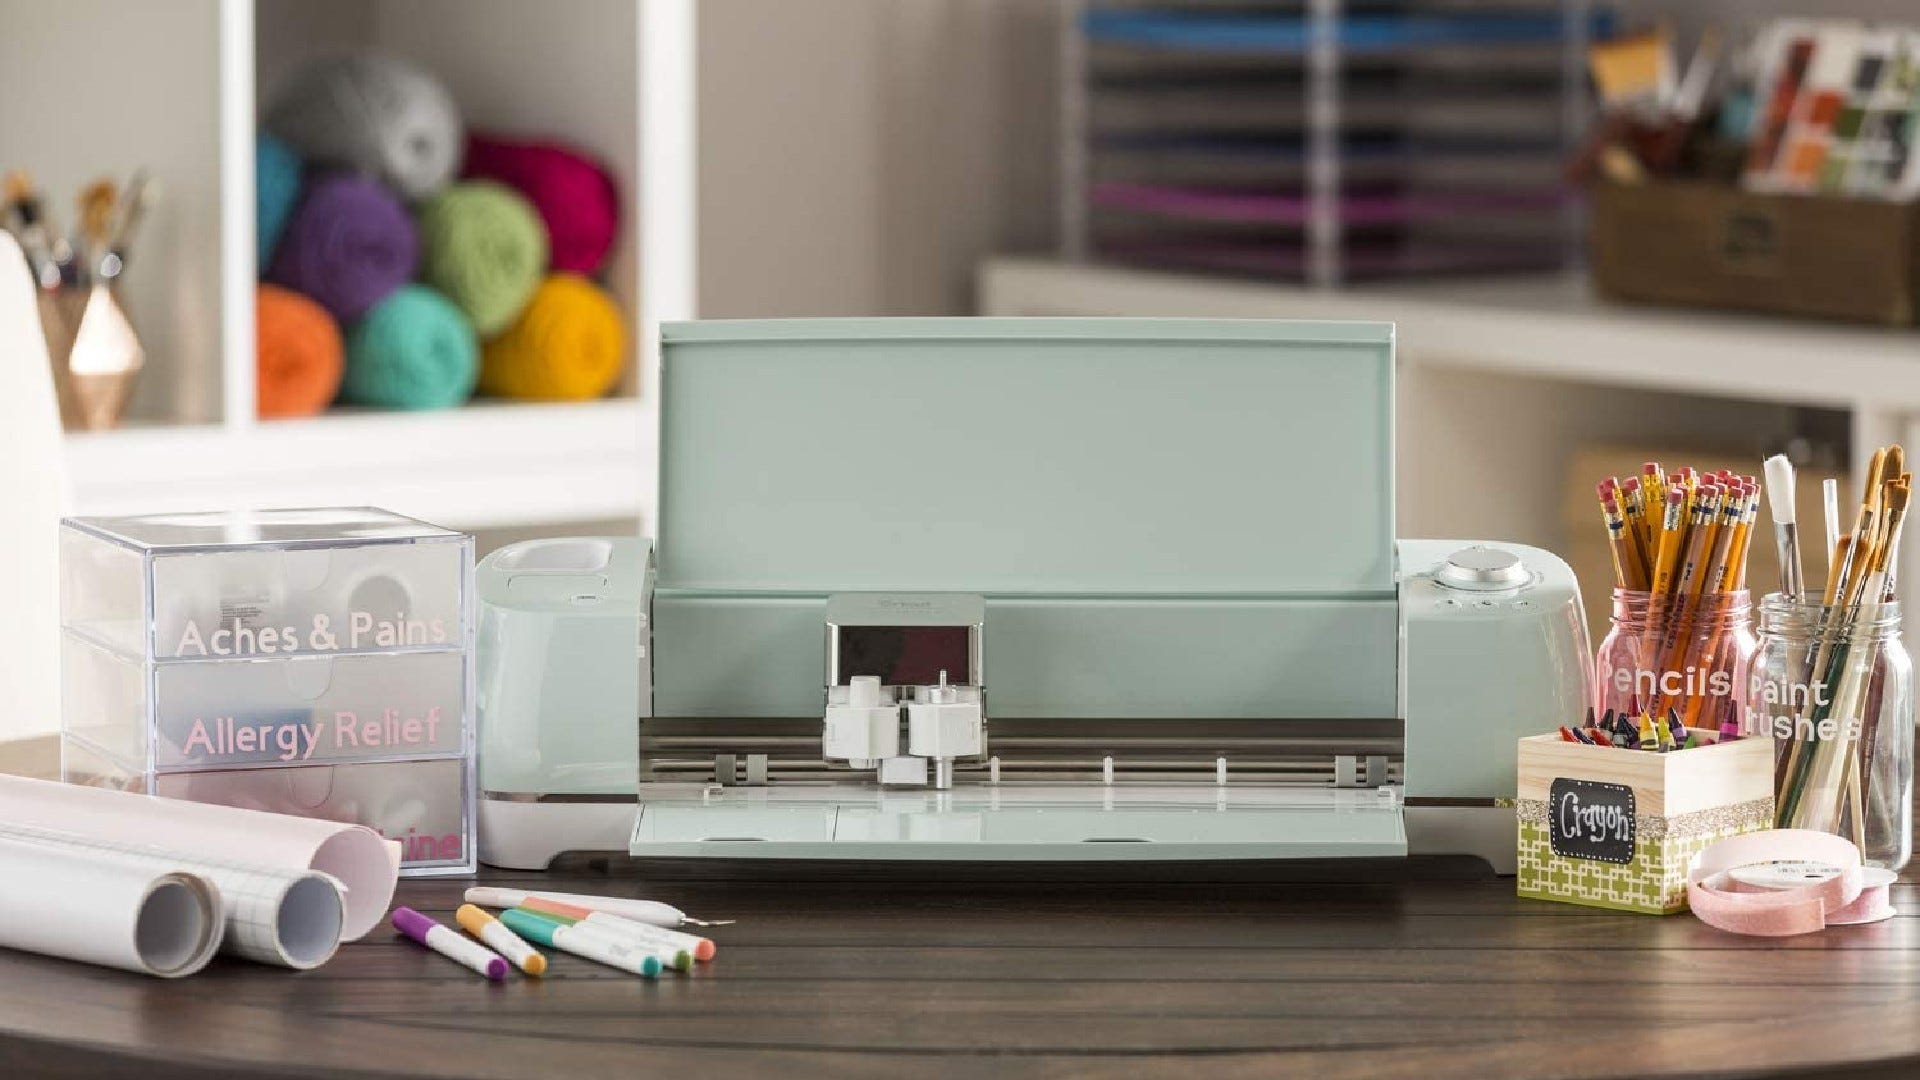 These Cricut Deals Will Boost Your Crafty Hobby or Business